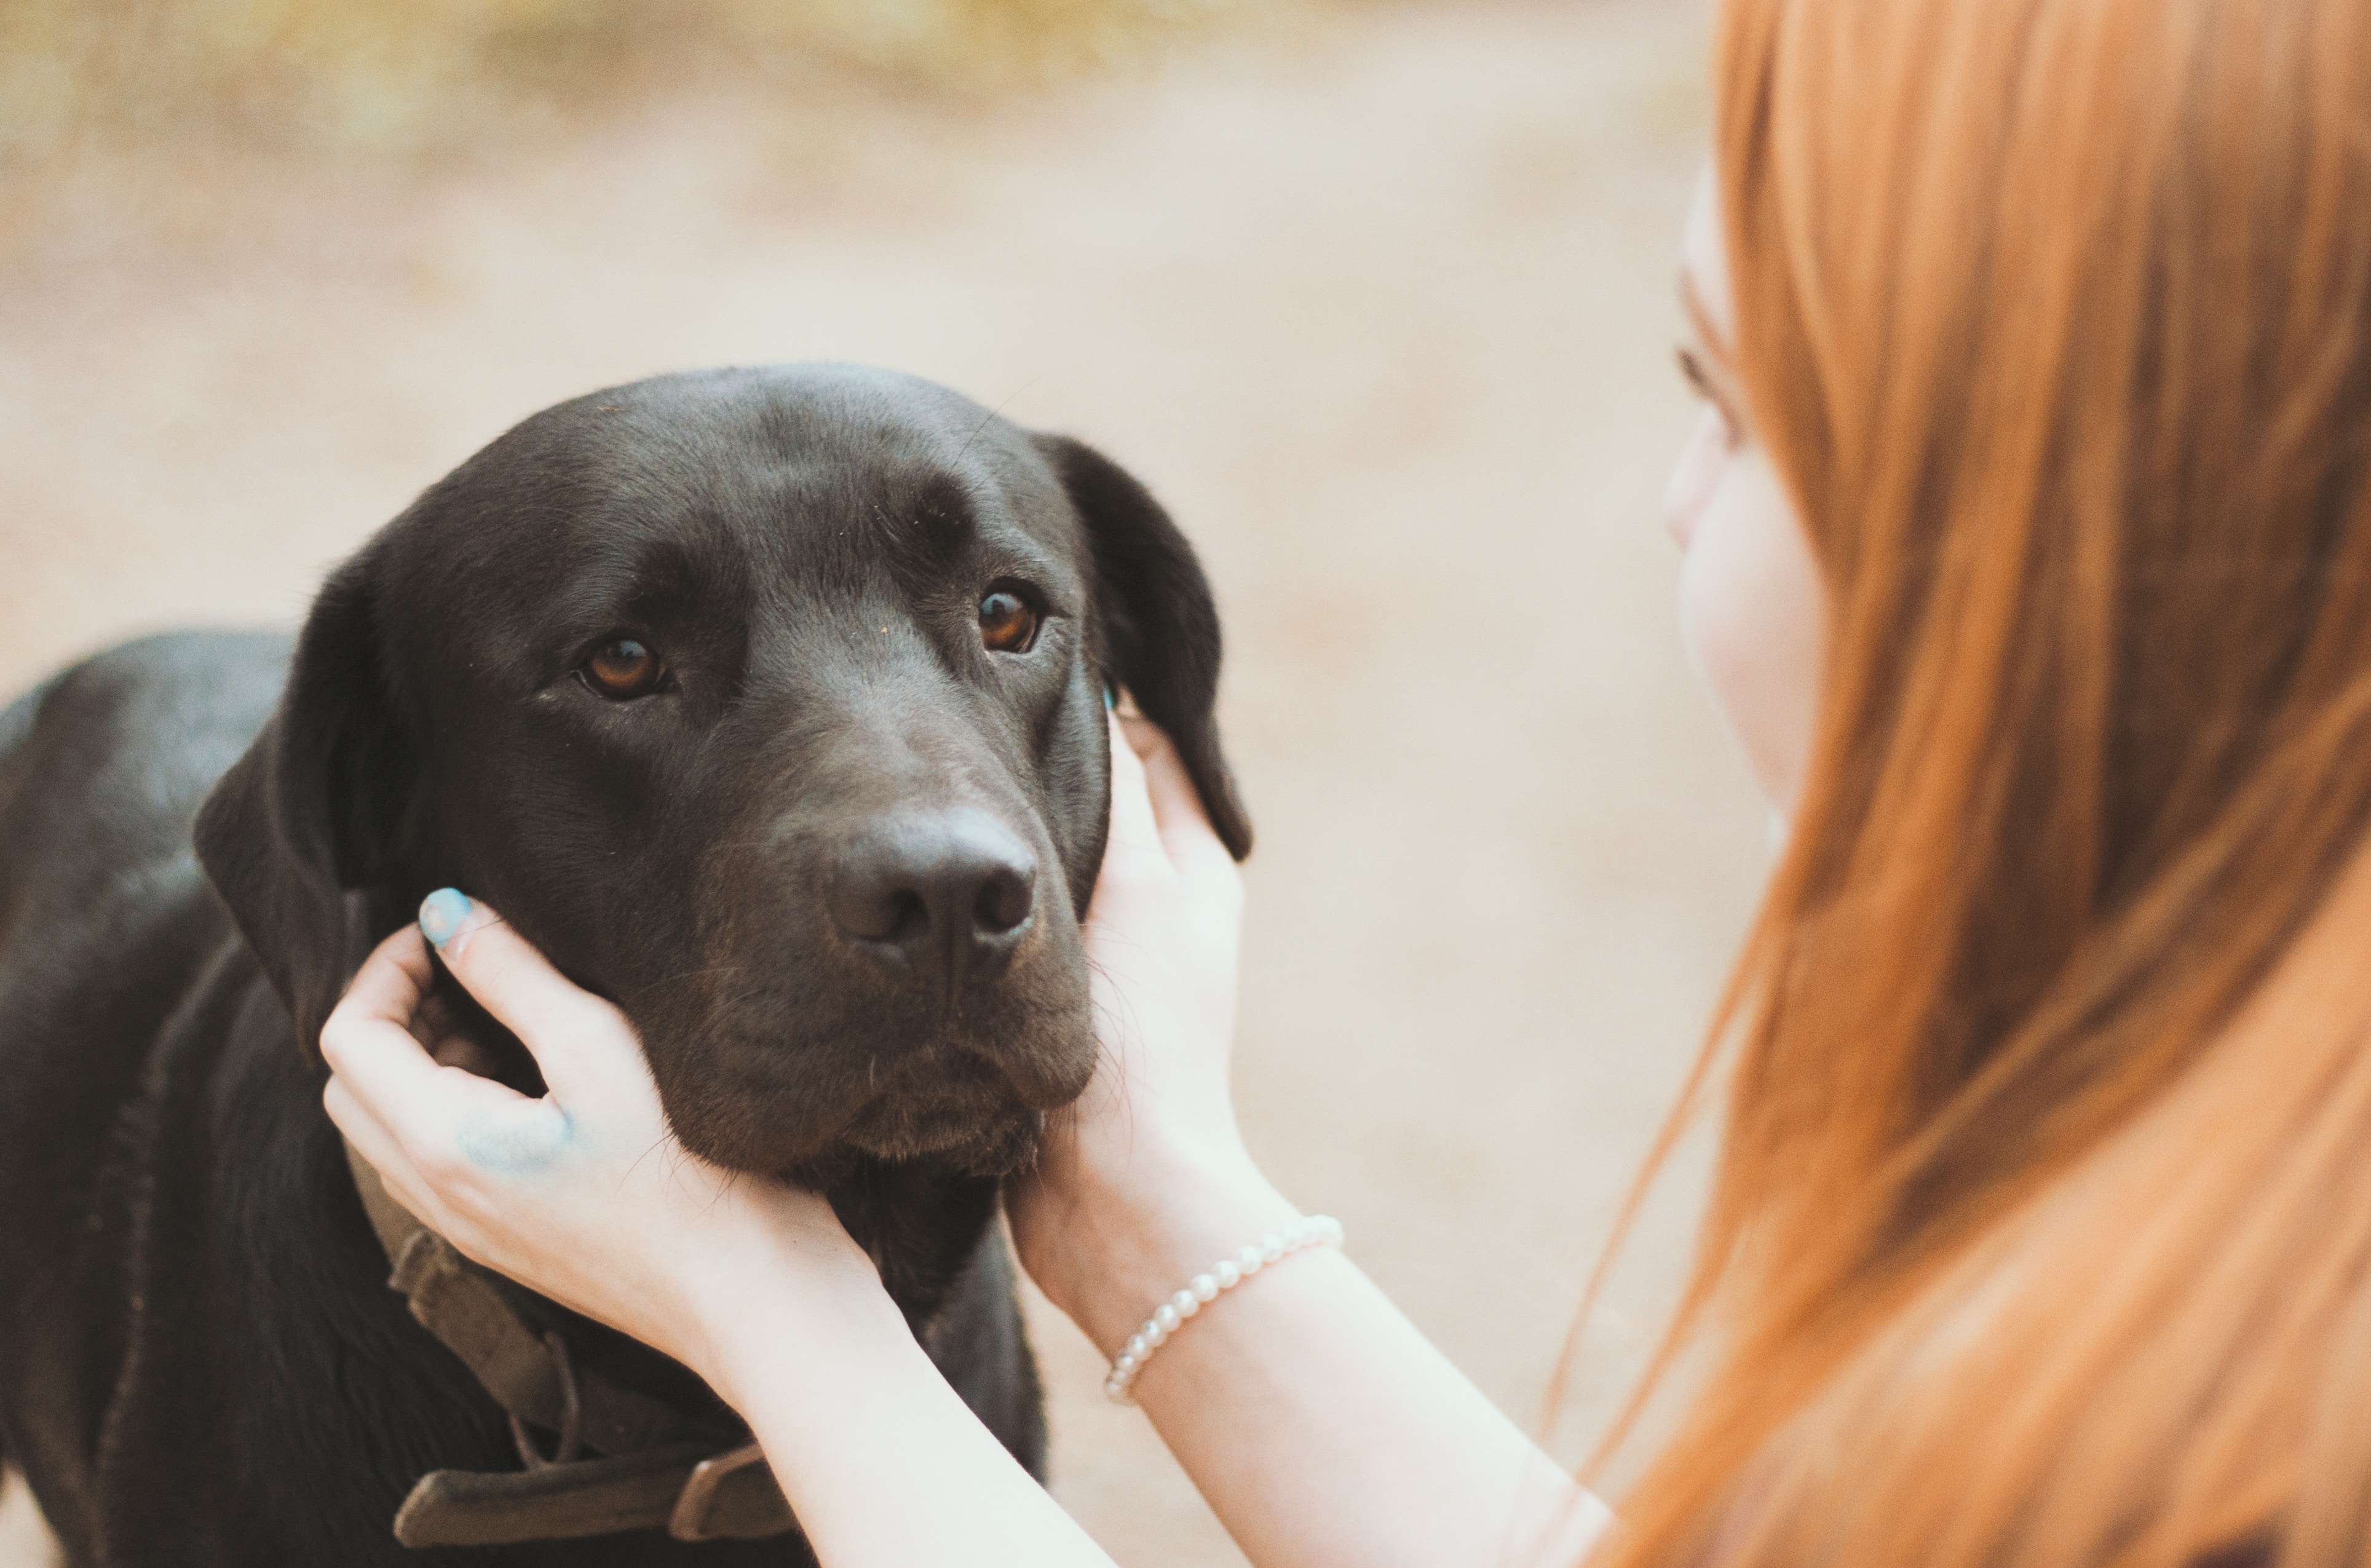 Dog Training Elite has expert dog trainers near you that are experienced in a variety of puppy training methods for Labradors.